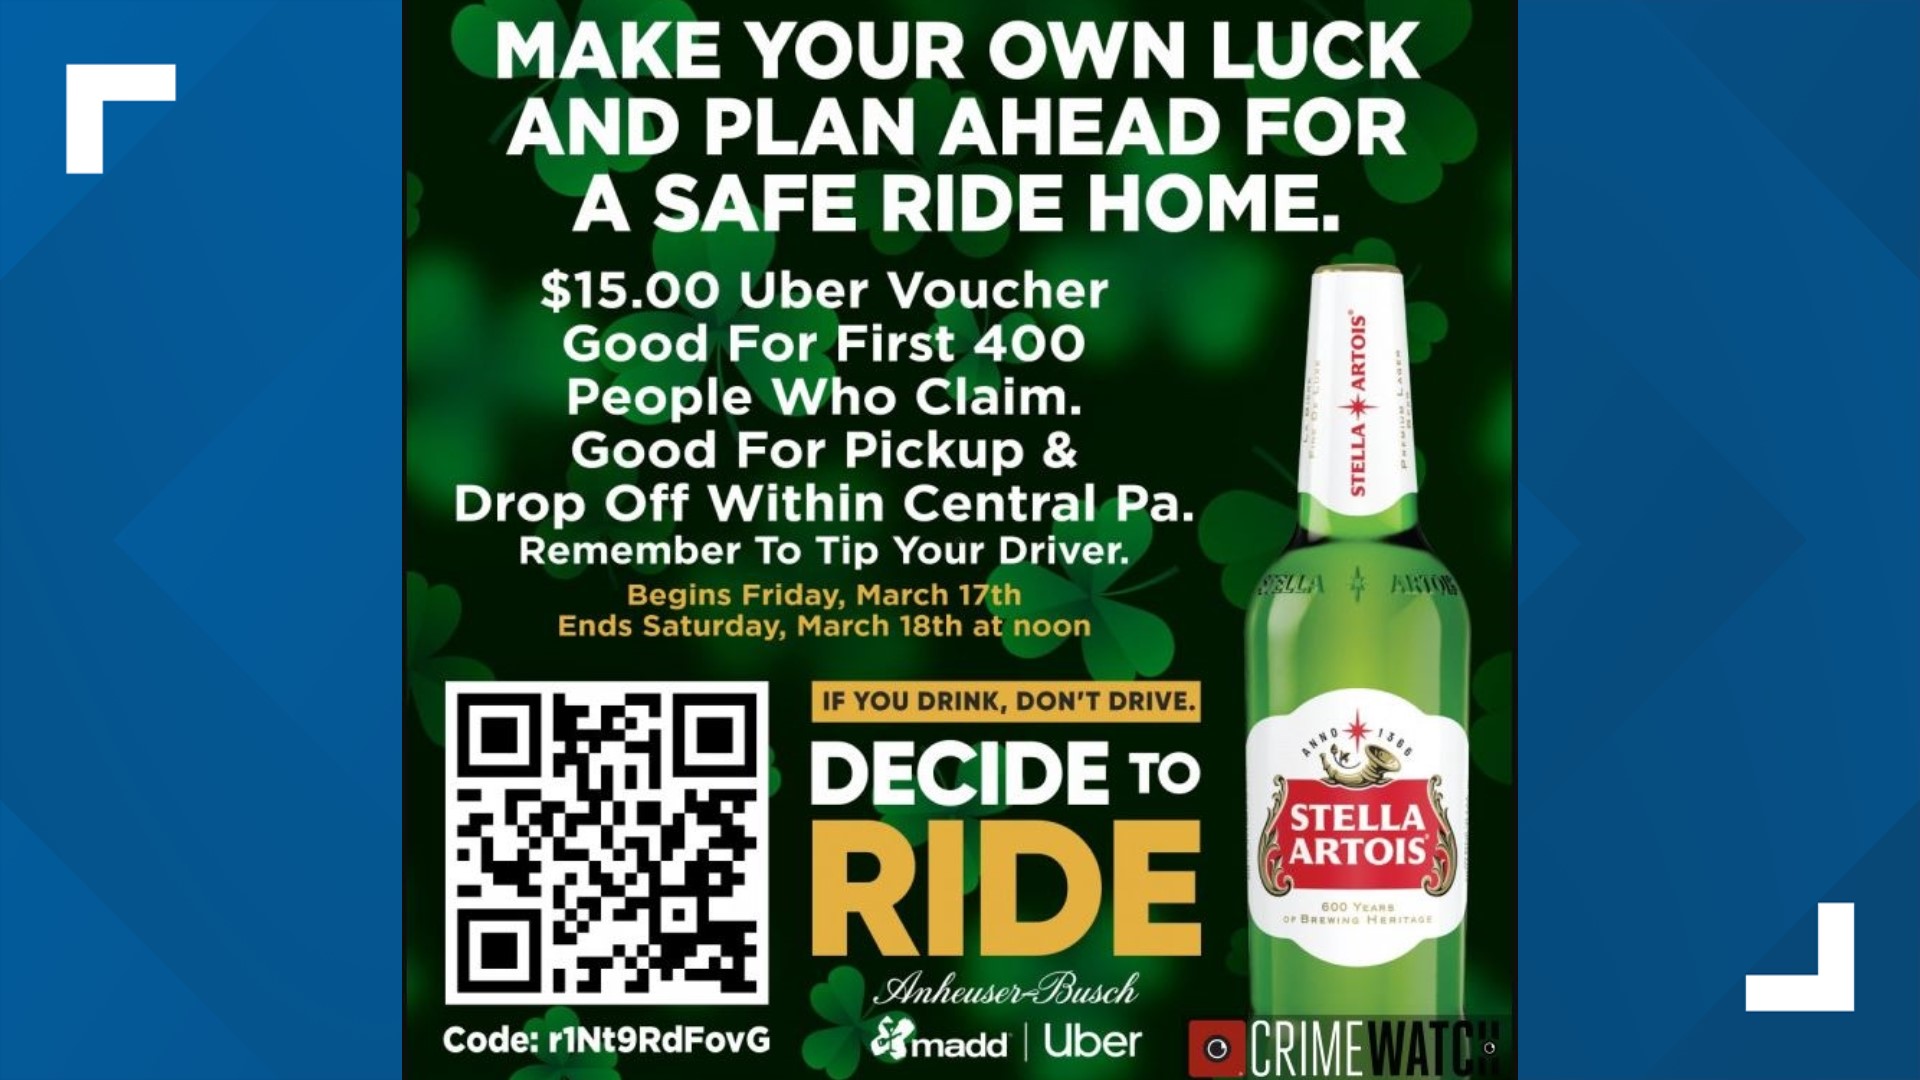 As cities gear up for the celebration of St. Patrick’s Day, state police and a number of organizations crack down on drunk driving.